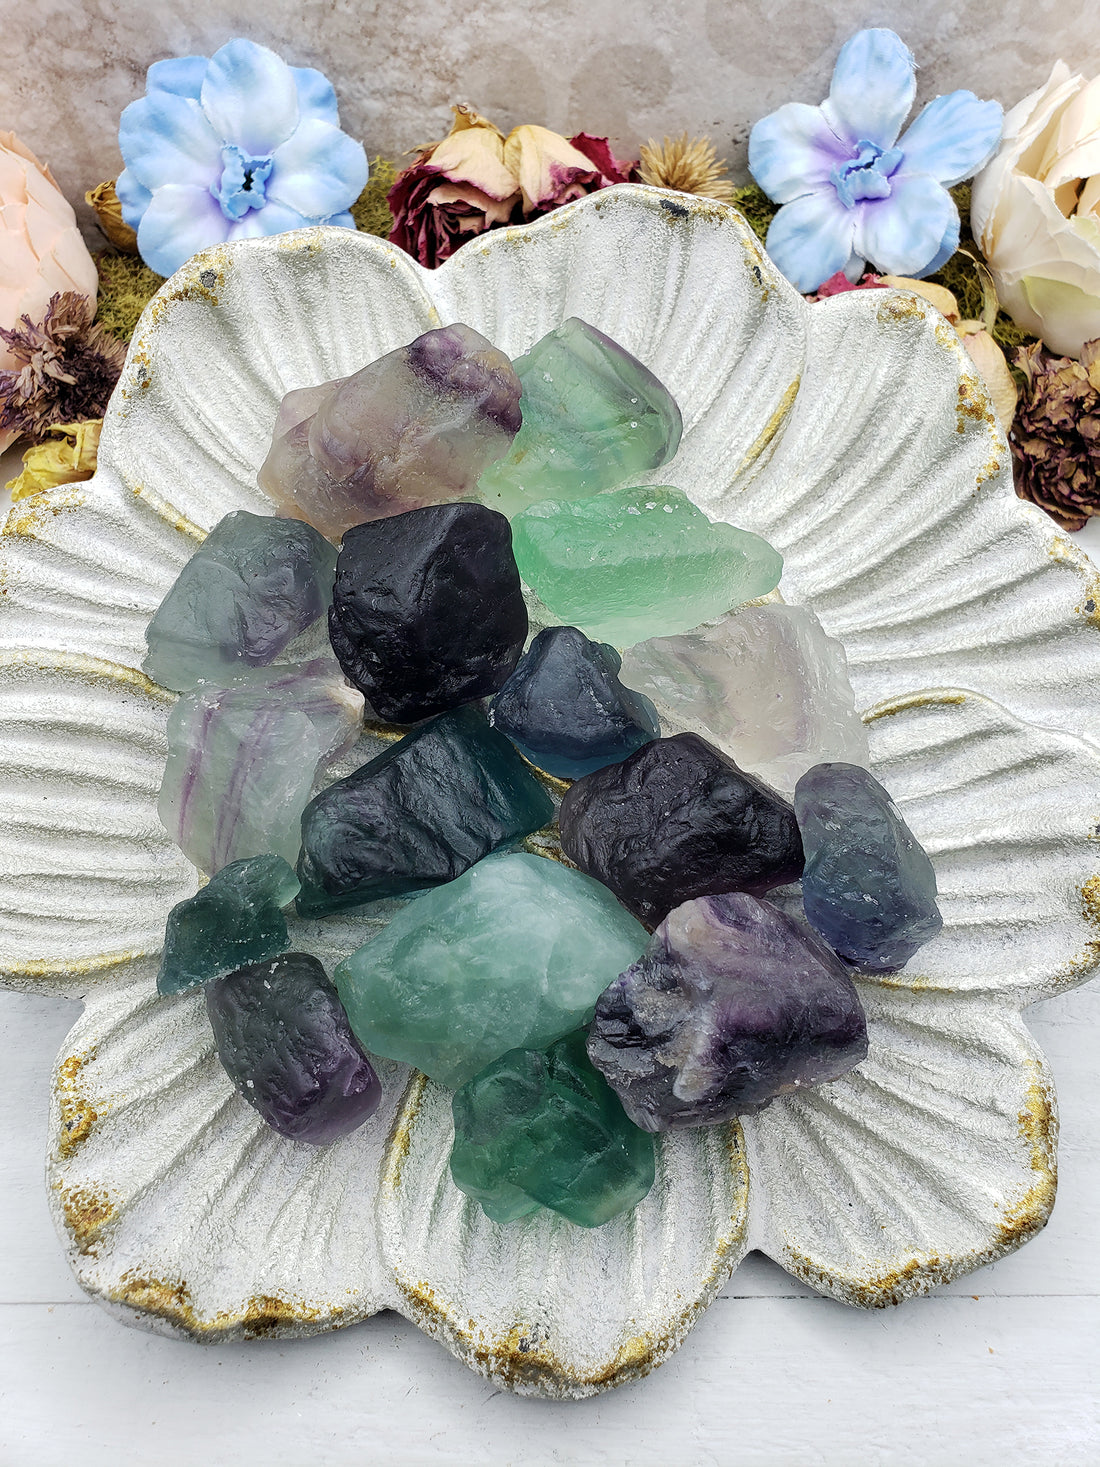 rough fluorite crystal pieces on floral display dish